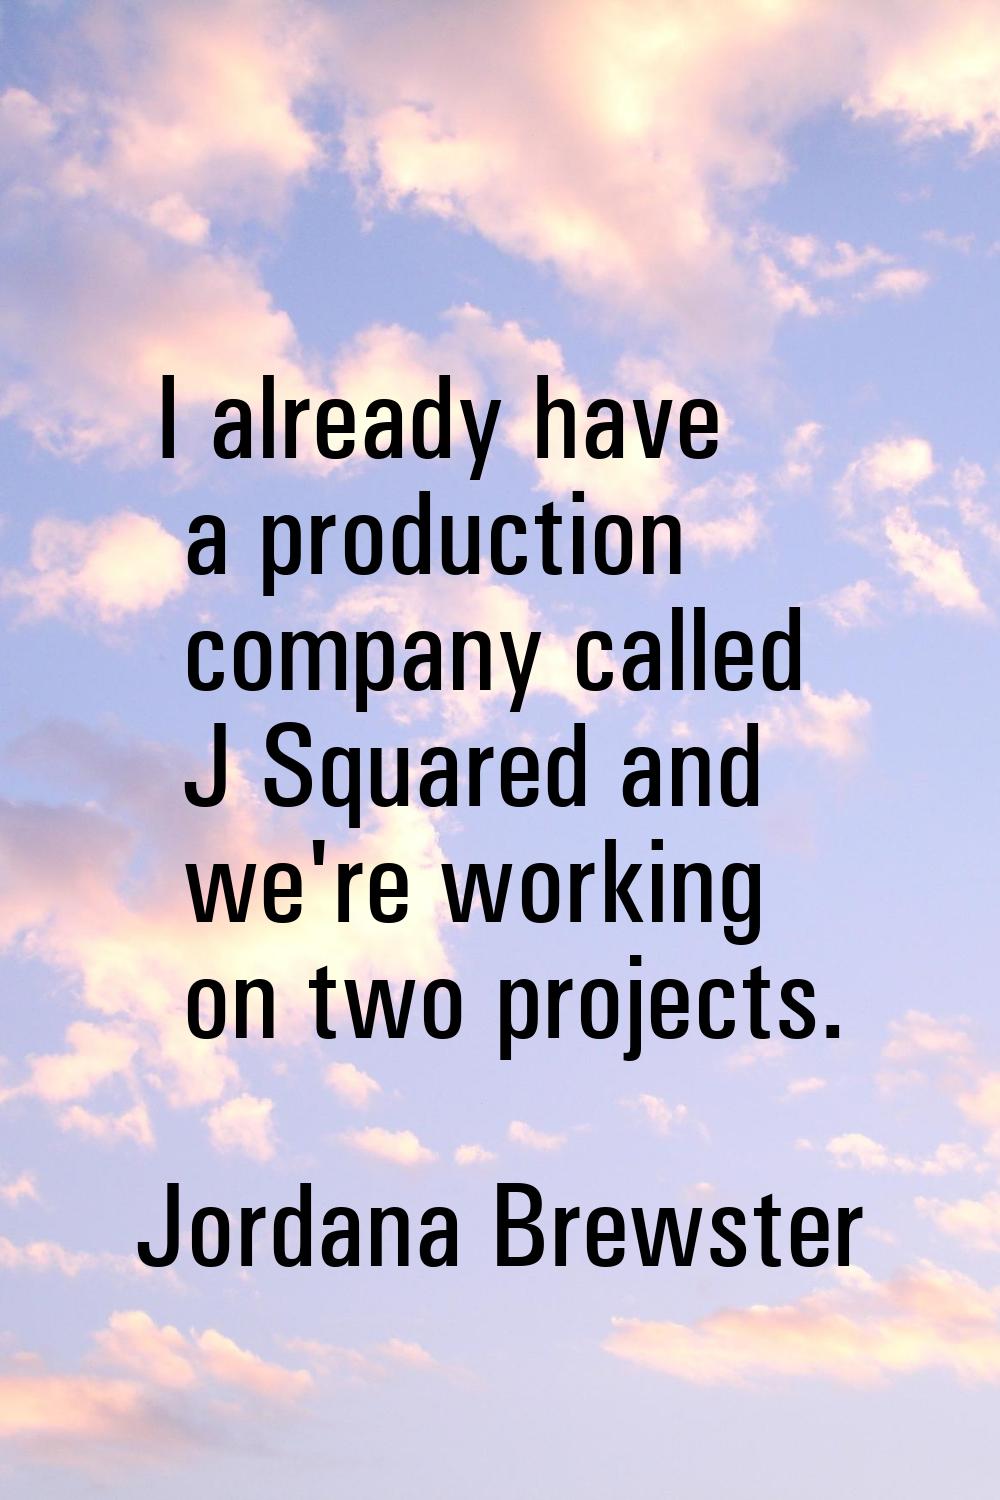 I already have a production company called J Squared and we're working on two projects.